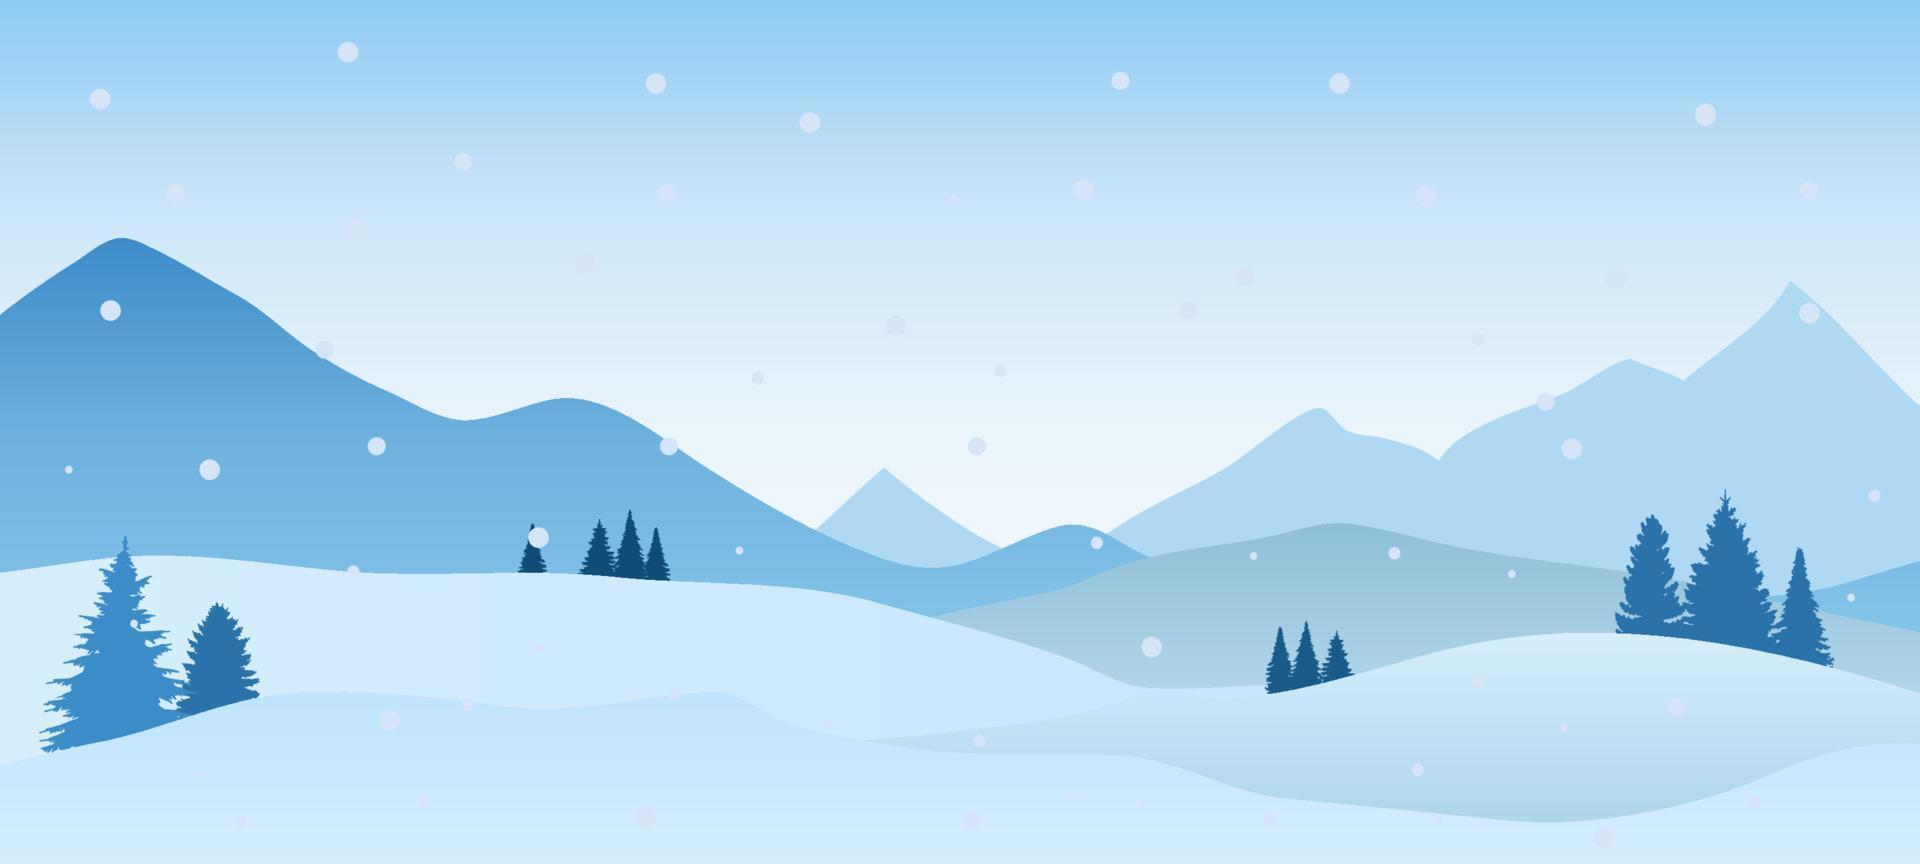 Winter snow scene with mountains, Christmas background with snow vector